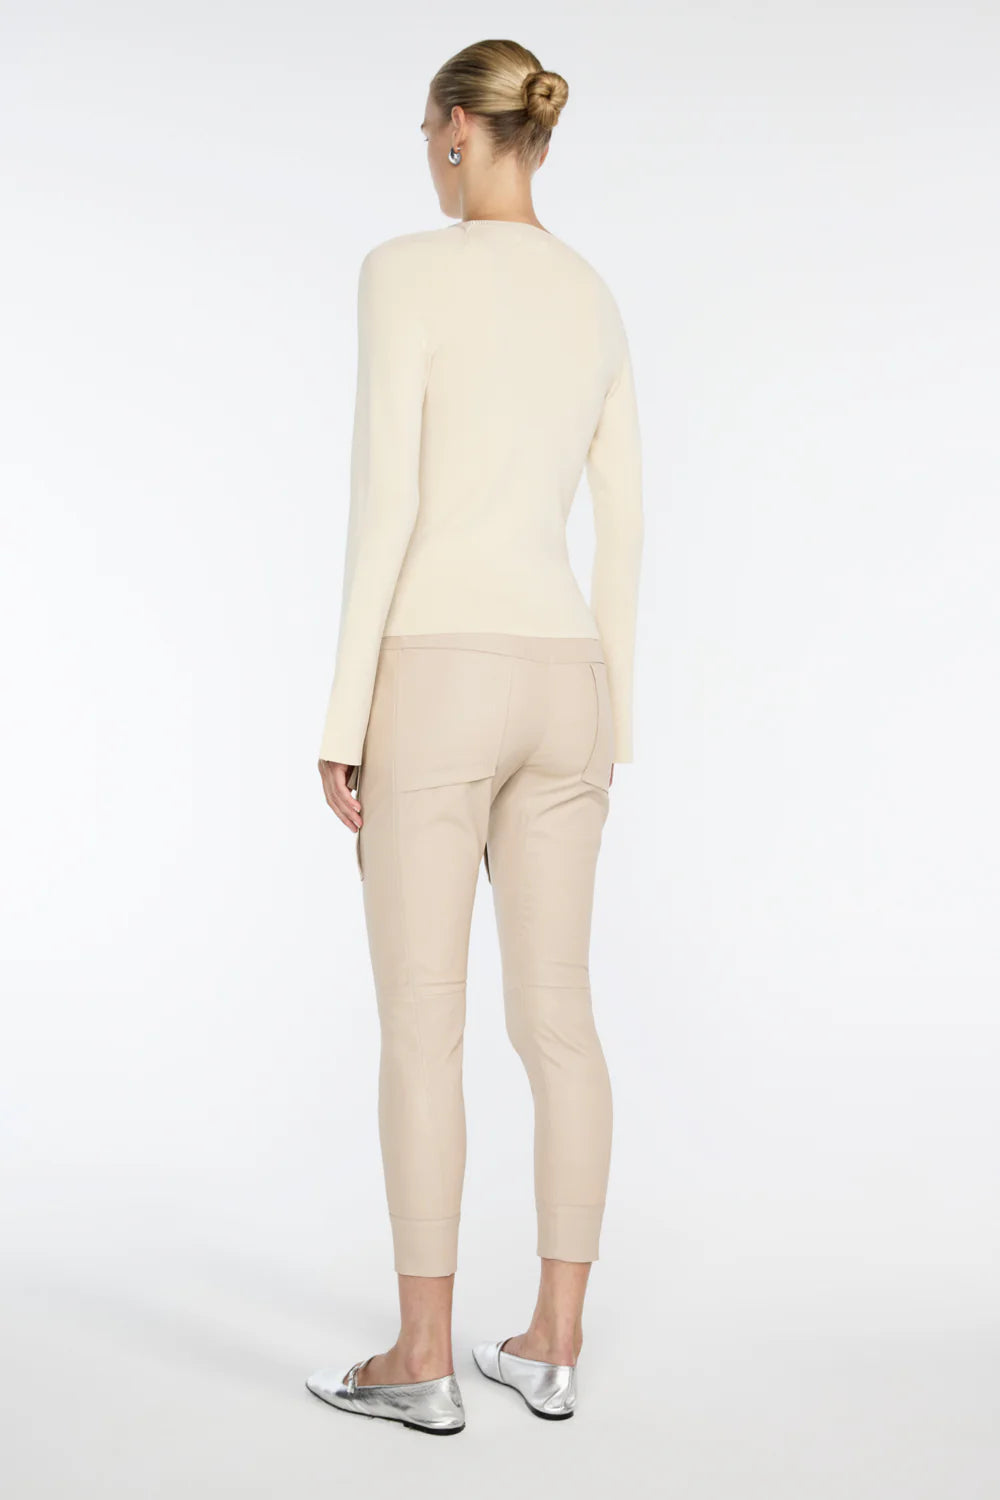 MANNING CARTELL Future Path Knit Top